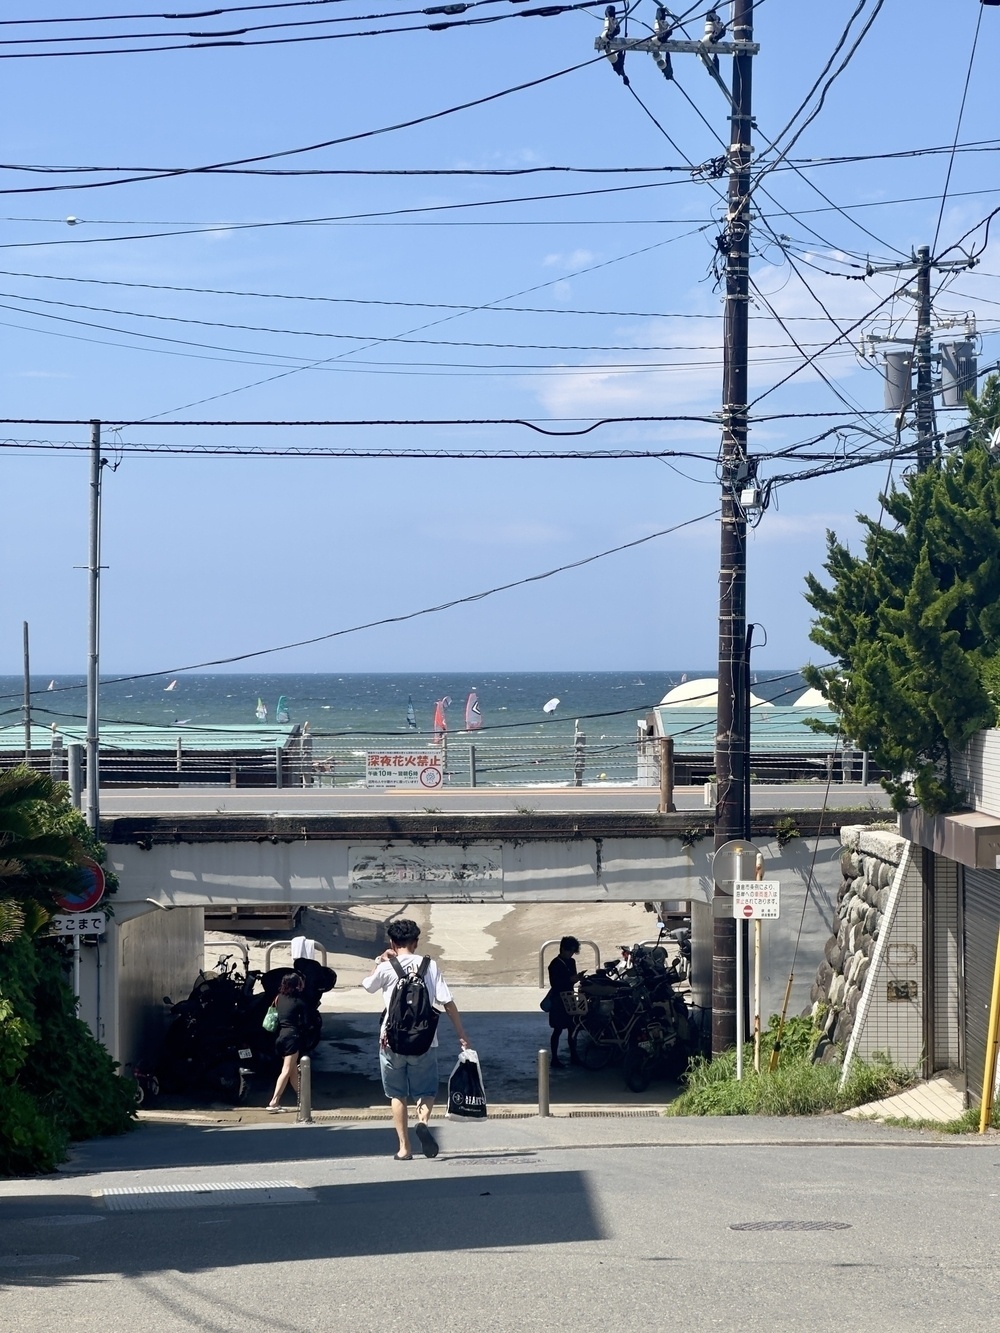 Kamakura beach looking from OSJ Shonan Clubhouse area, under a perfect blue sky